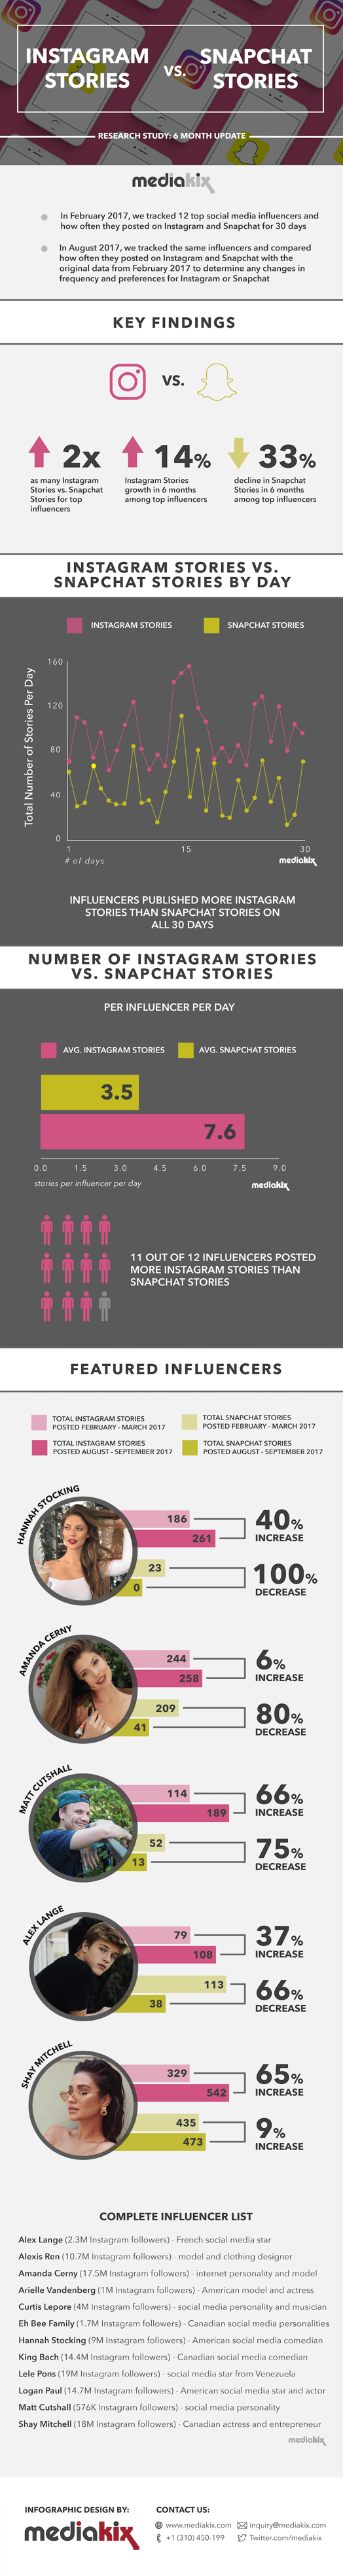 Instagram-Stories-VS-Snapchat-Stories-Top-Porpaceers-Infographic1.png